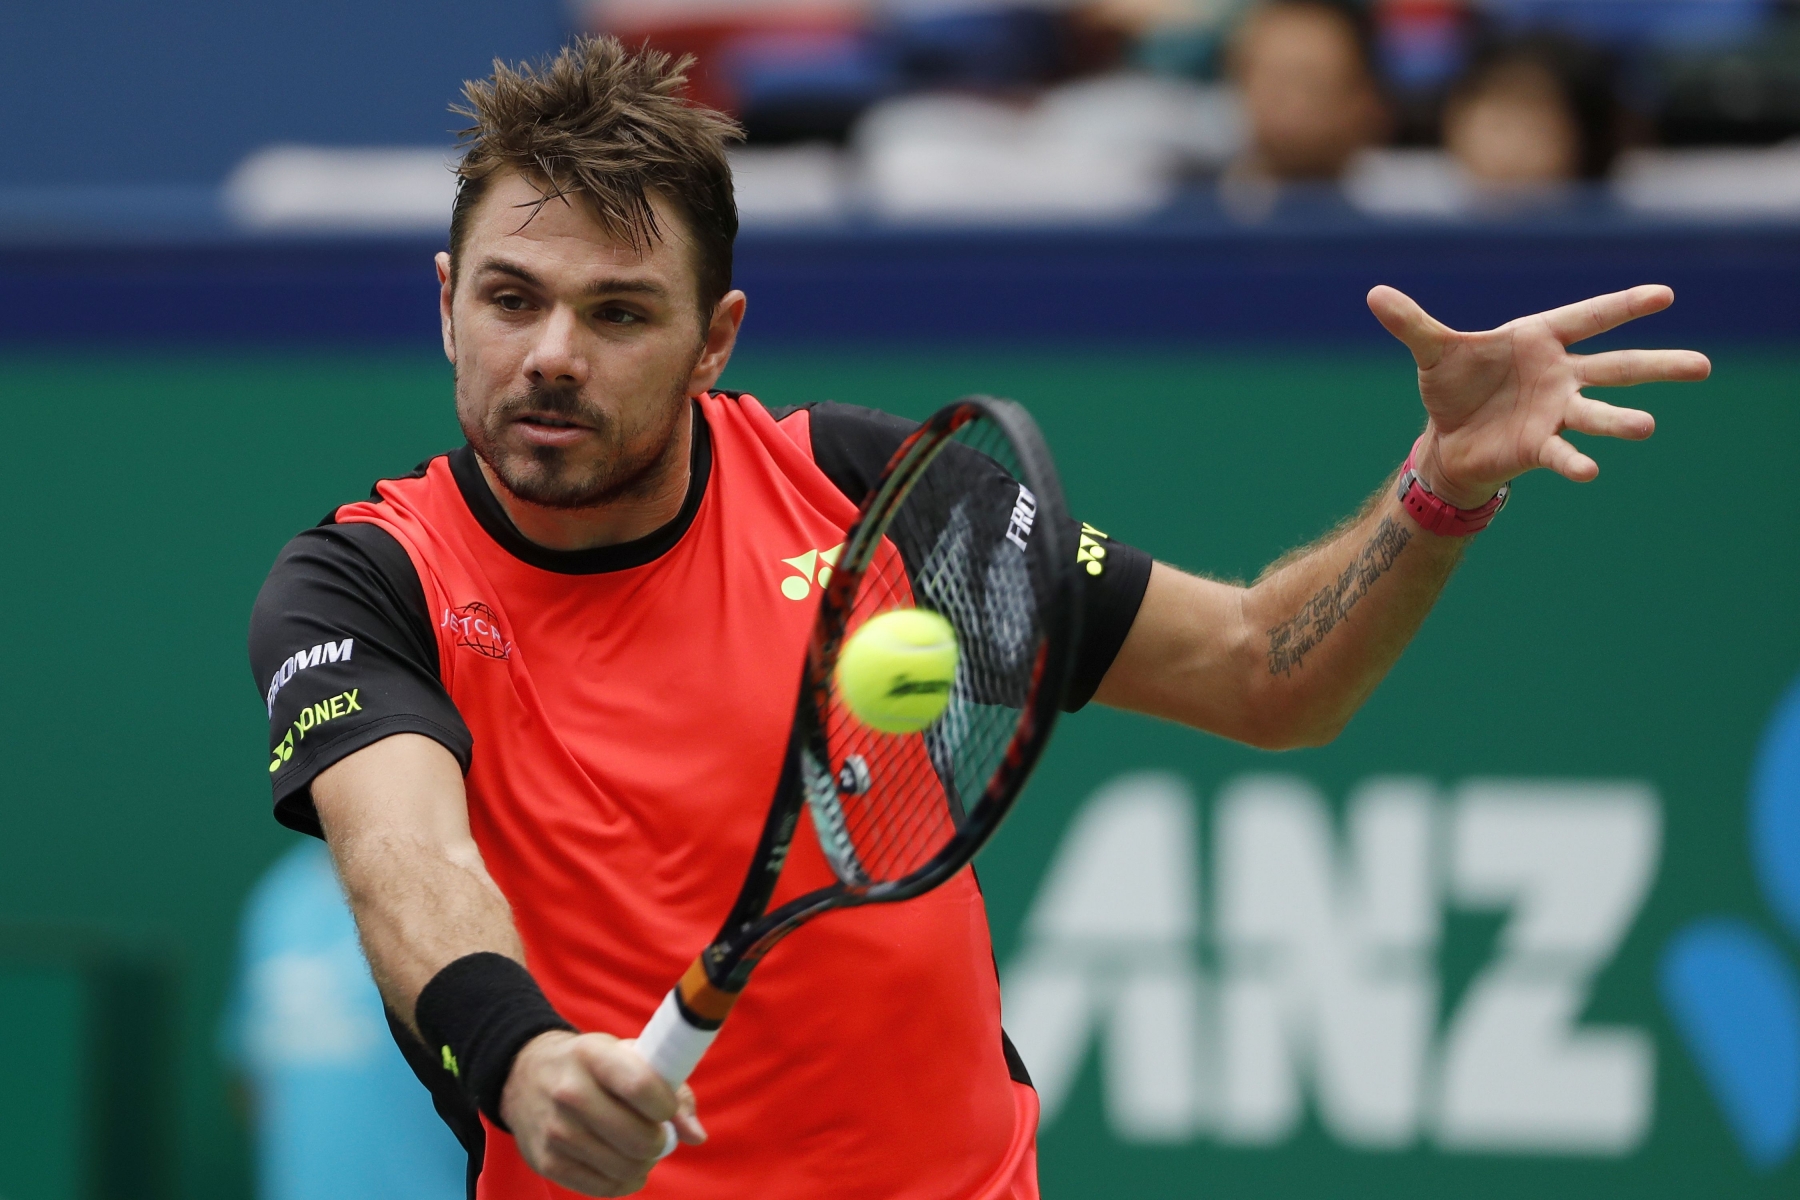 Stan Wawrinka of Switzerland hits a return shot against Kyle Edmund of Britain during the men's singles match of the Shanghai Masters tennis tournament at Qizhong Forest Sports City Tennis Center in Shanghai, China, Wednesday, Oct. 12, 2016. (AP Photo/Andy Wong)